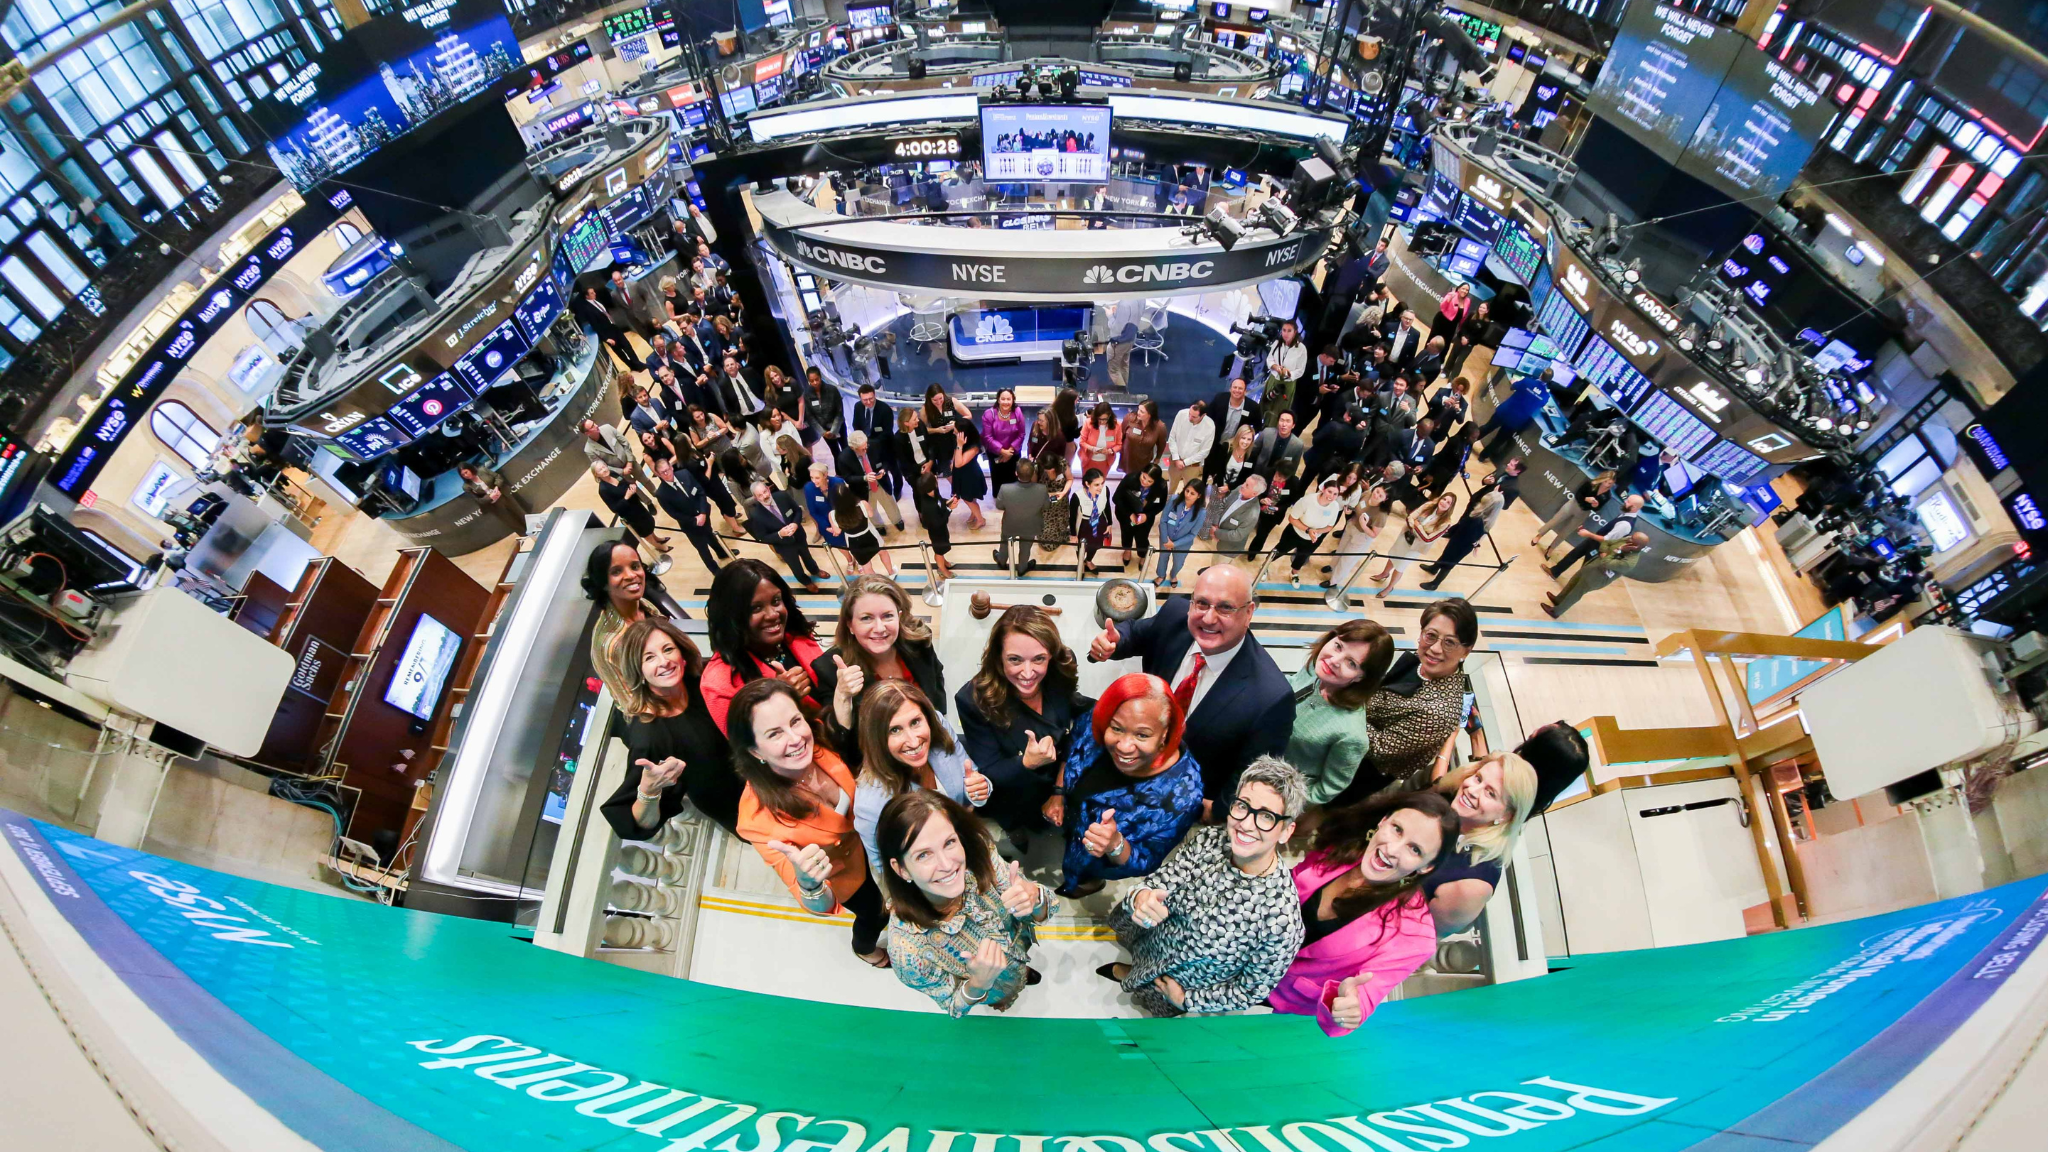 Sarah Samuels in group of women ringing the NYSE closing bell.